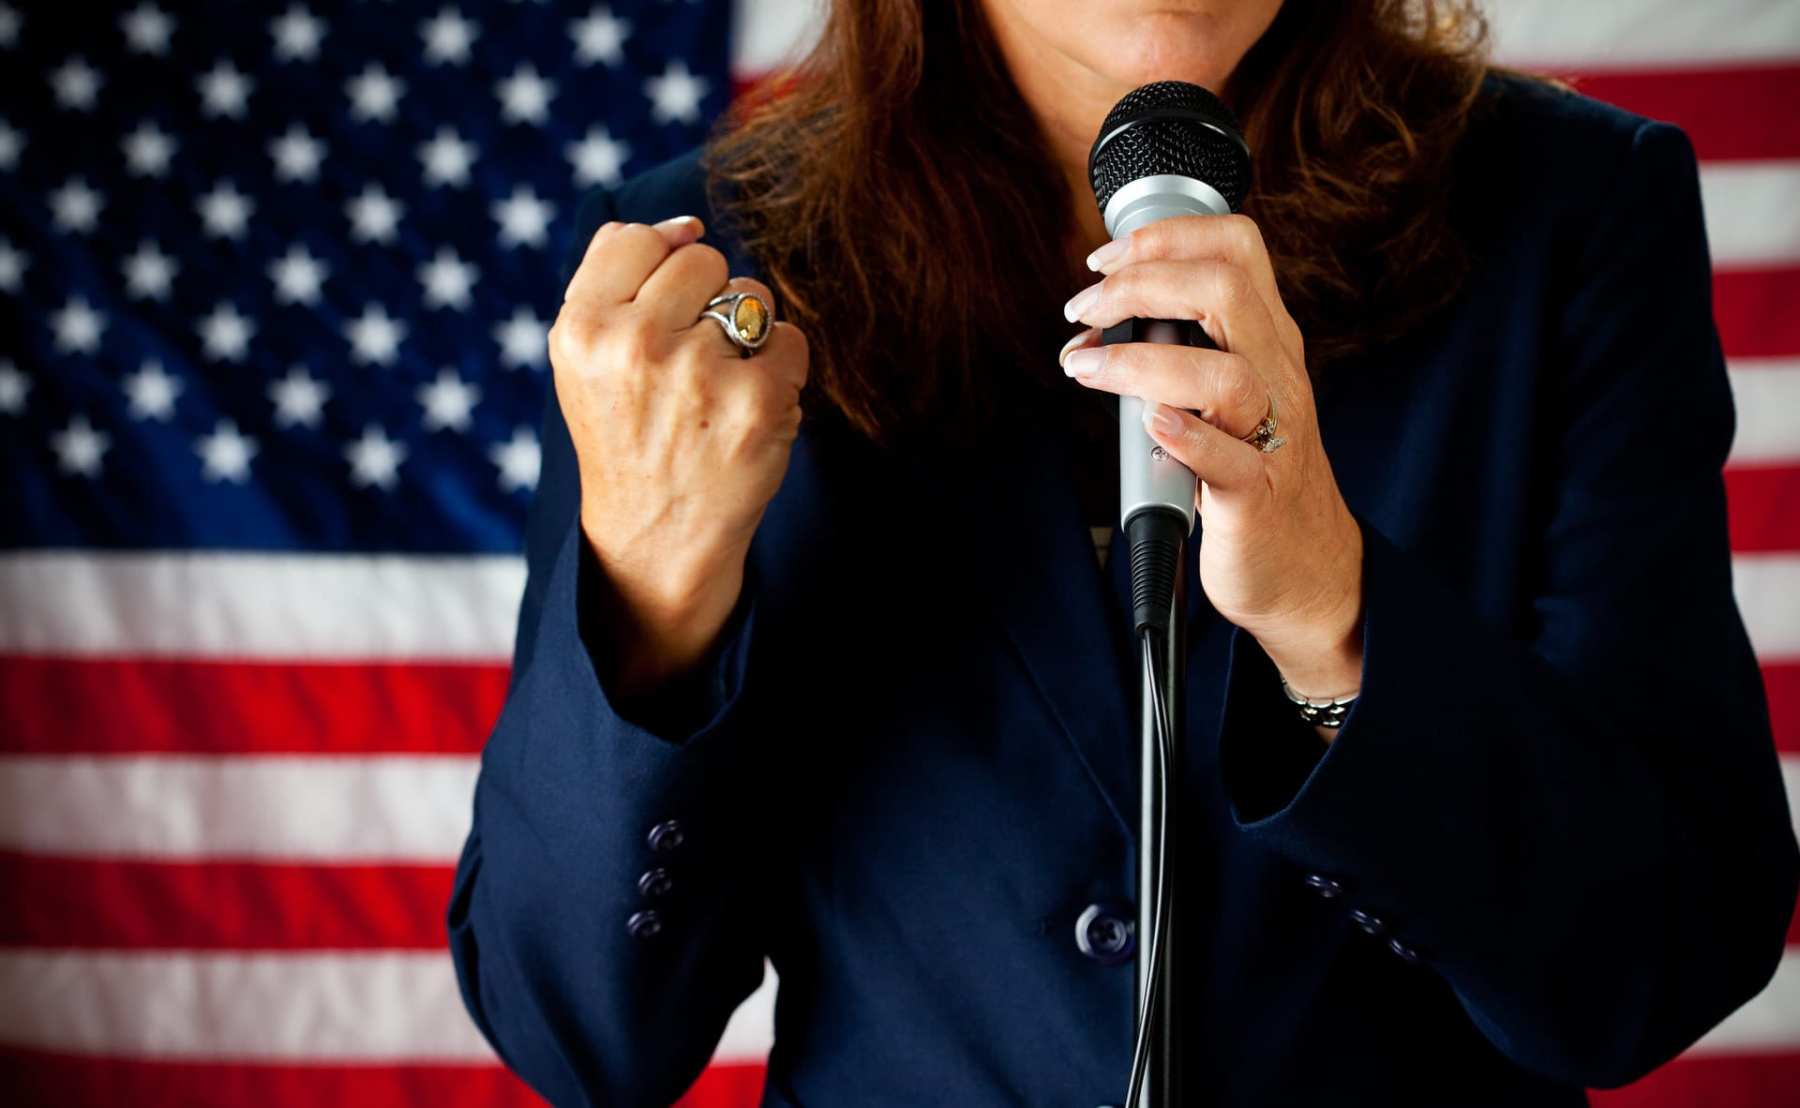 A woman candidate standing in front of an American flag.